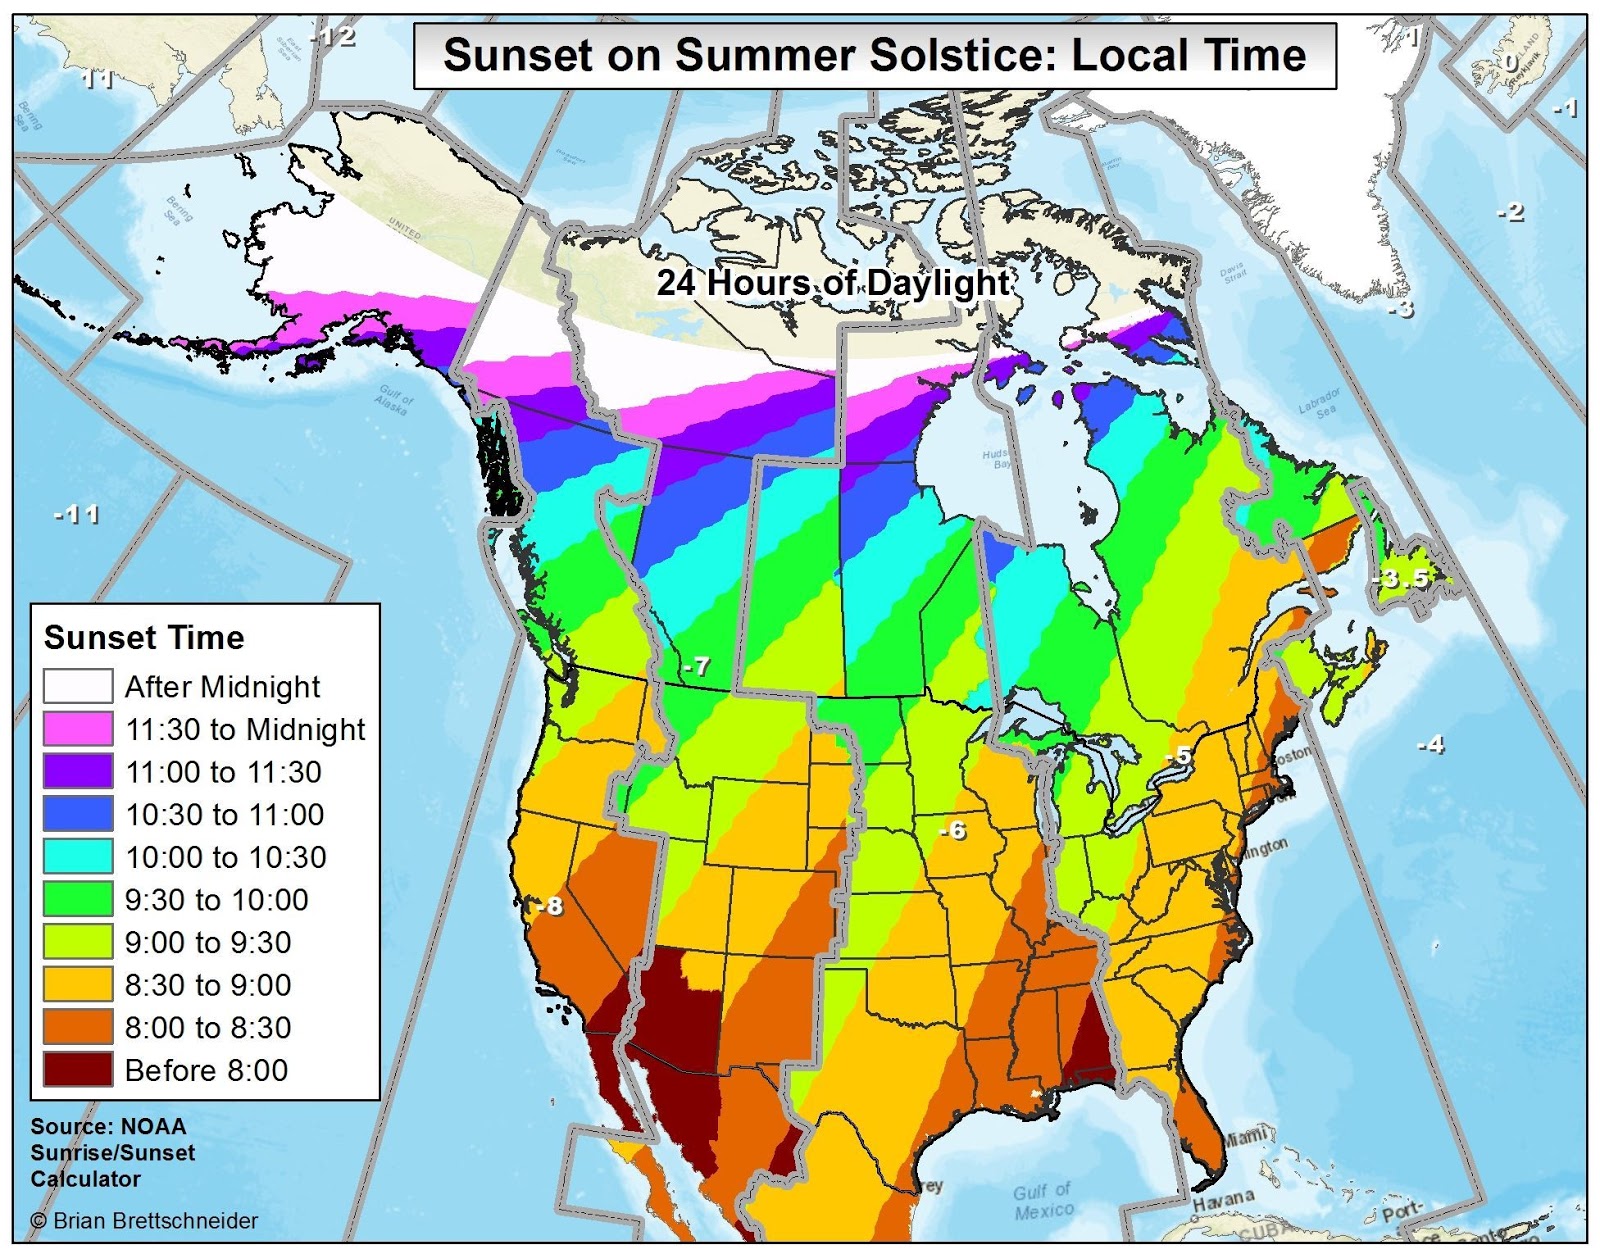 Sunrise time, sunset time, and hours of daylight on the summer solstice ...